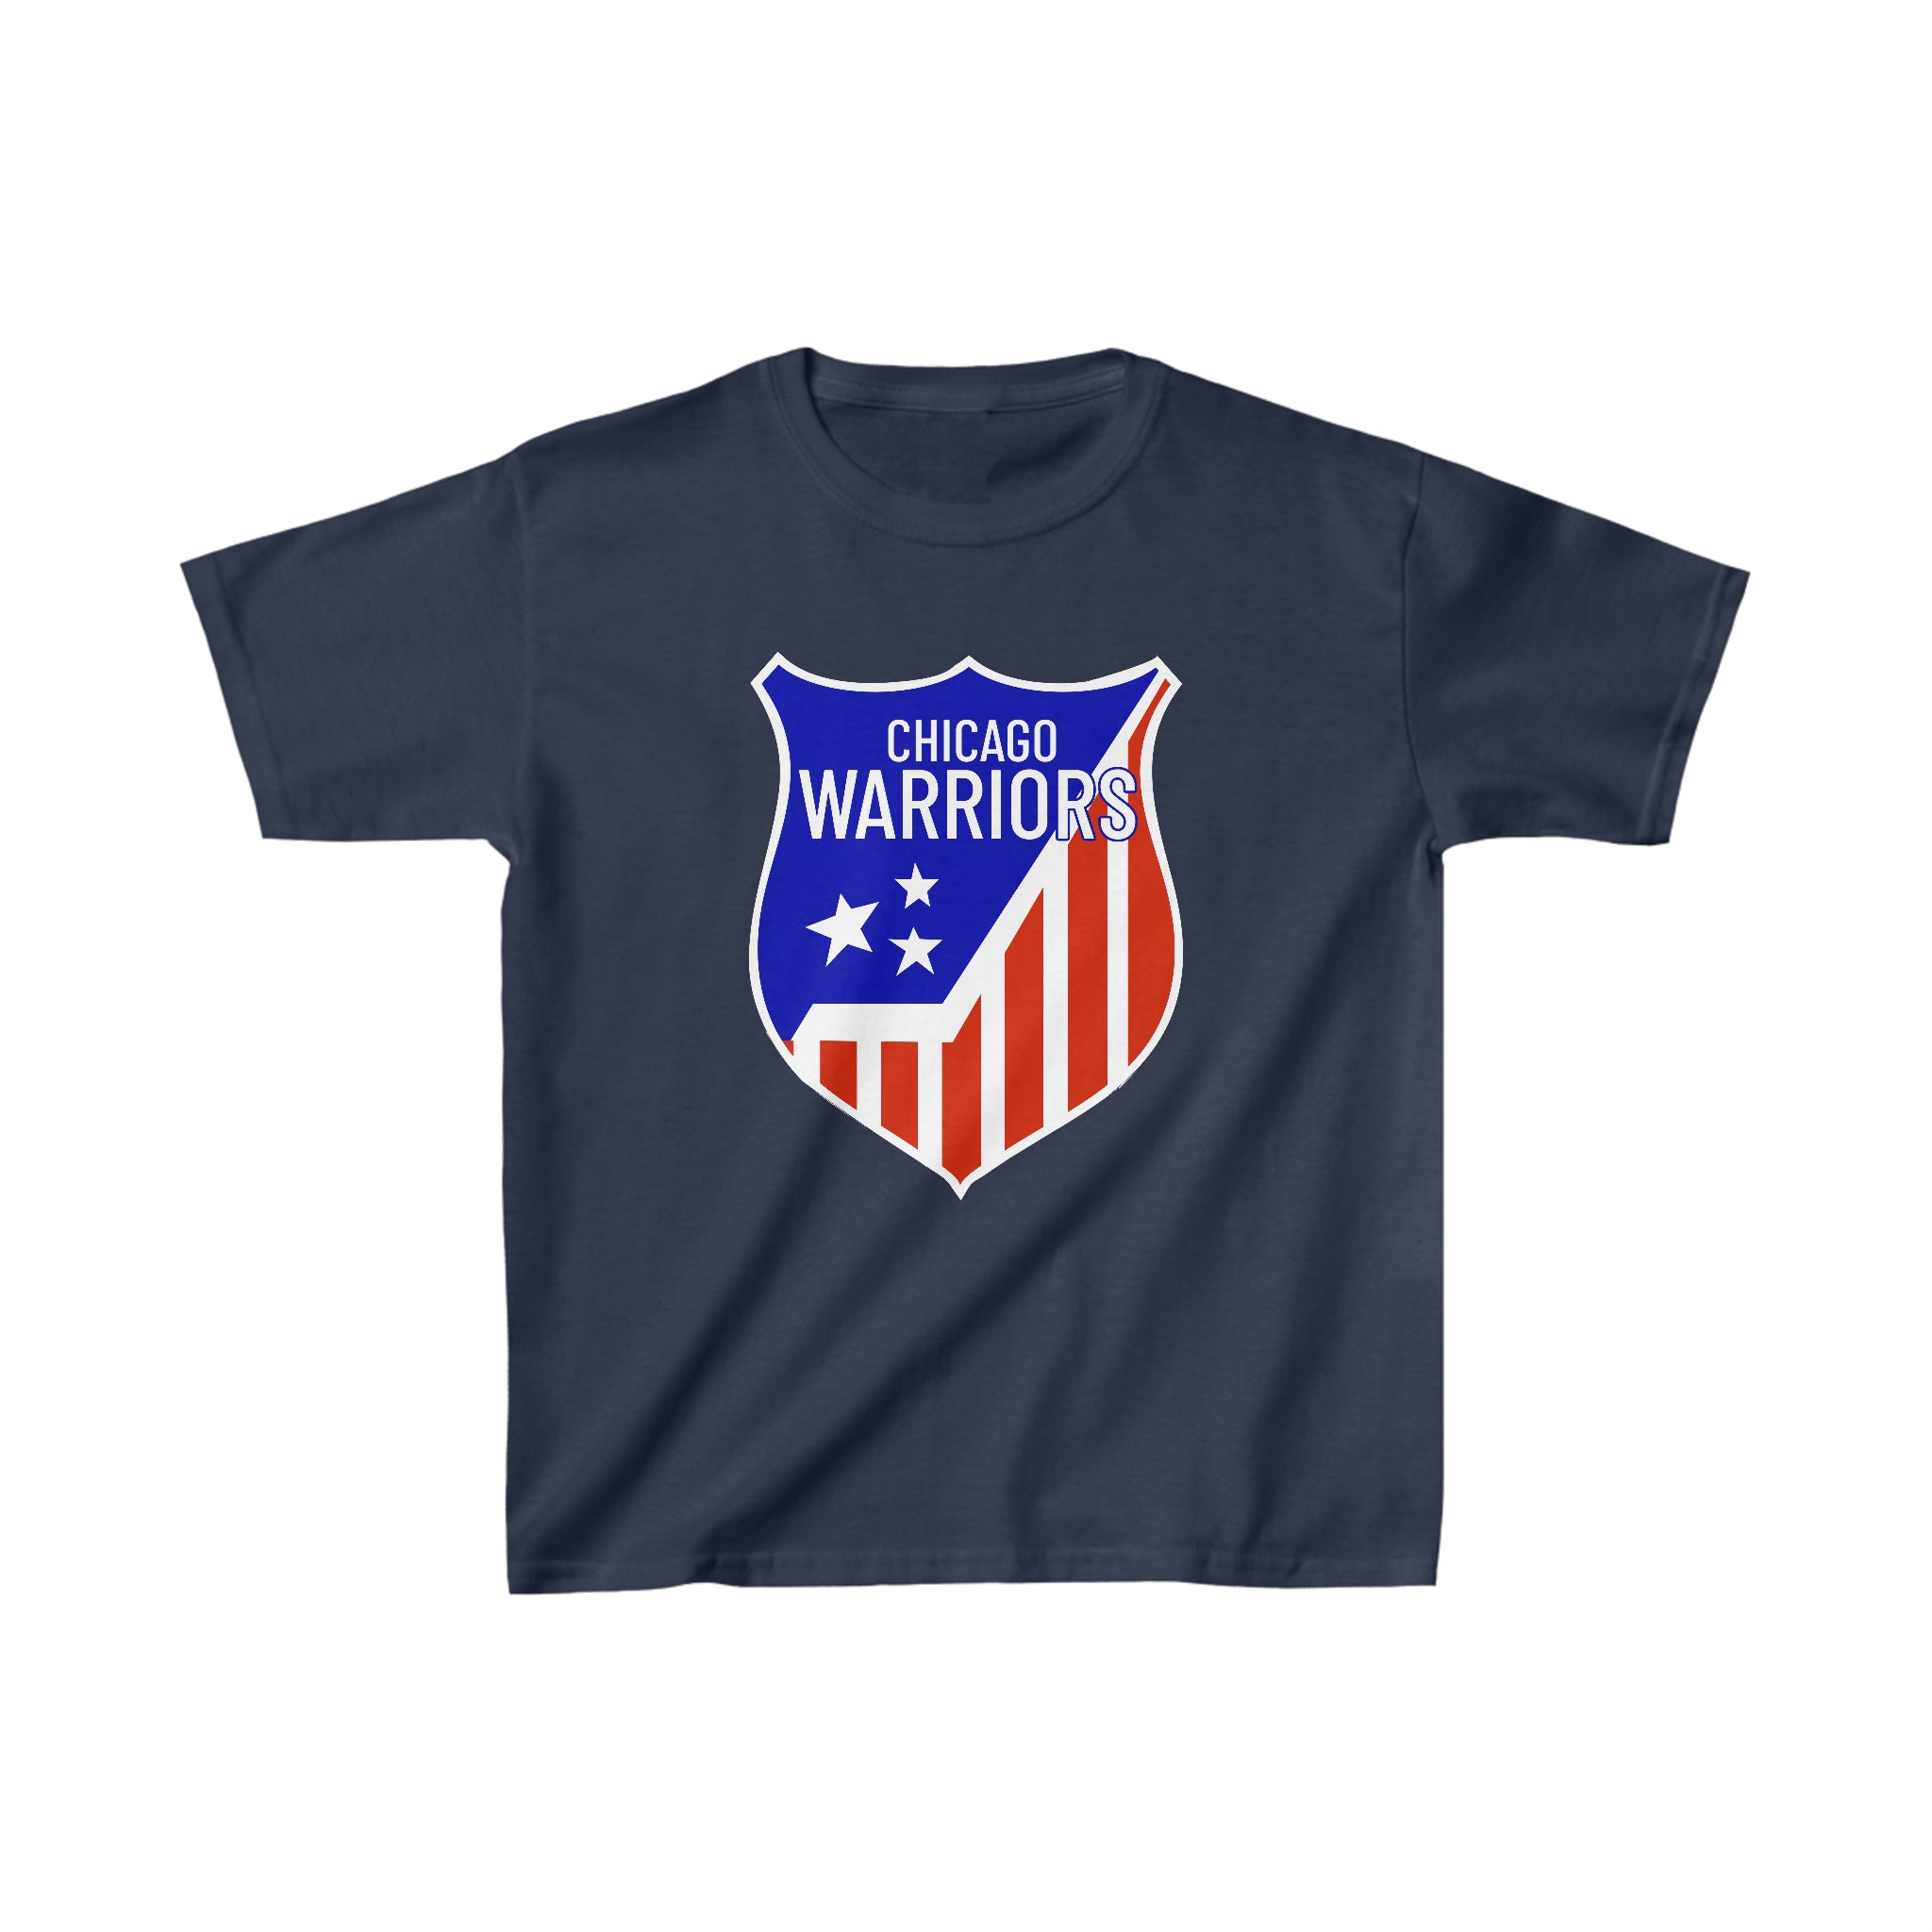 Chicago Warriors T-Shirt (Youth)